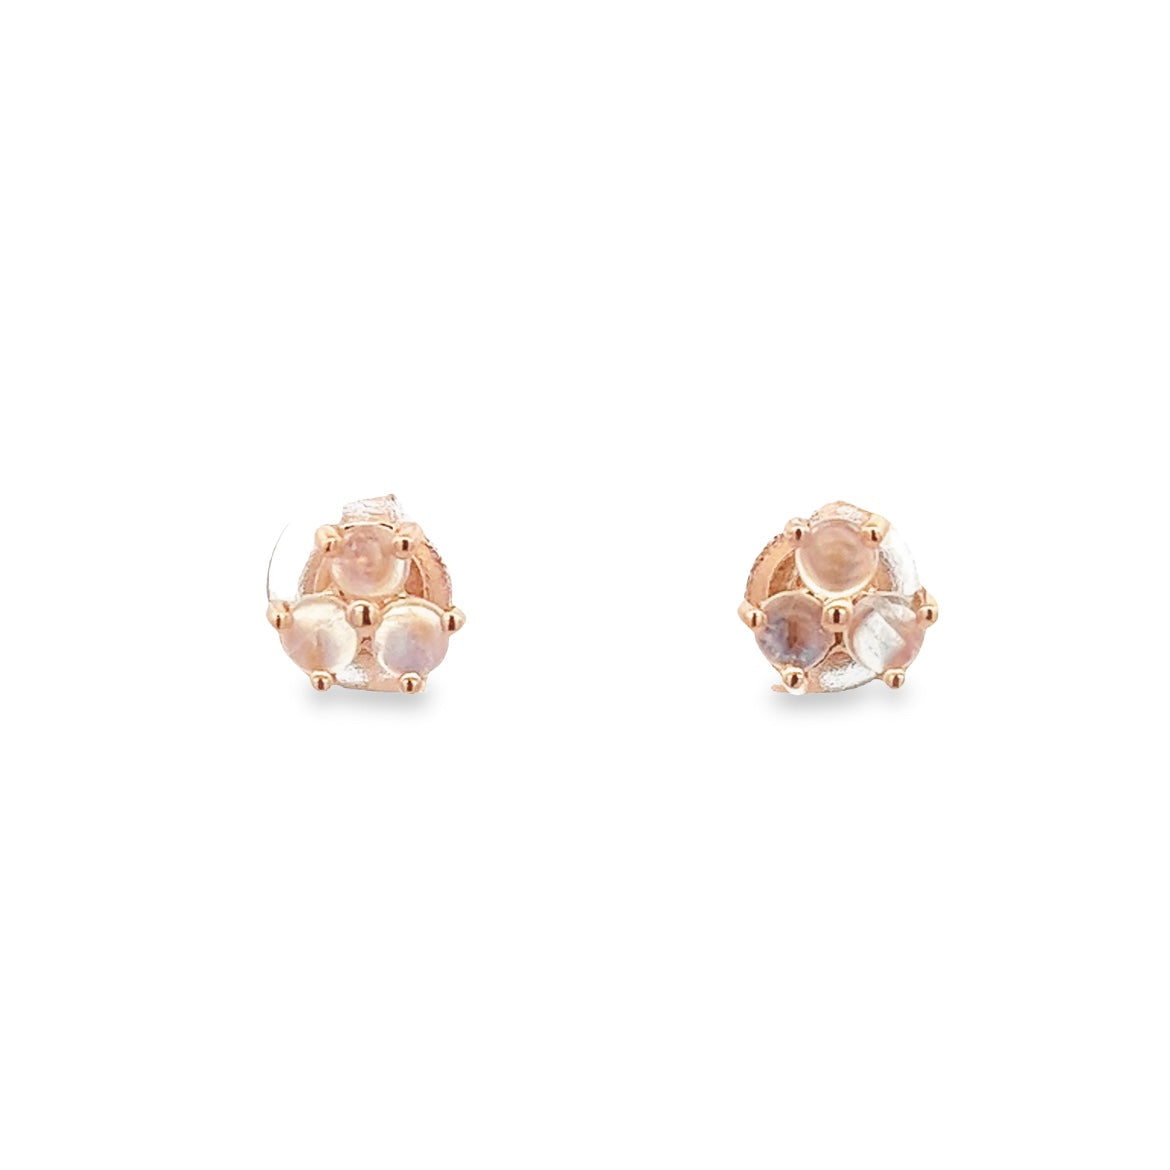 925 SILVER ROSE GOLD THREE STONE MOONSTONE EARRINGS